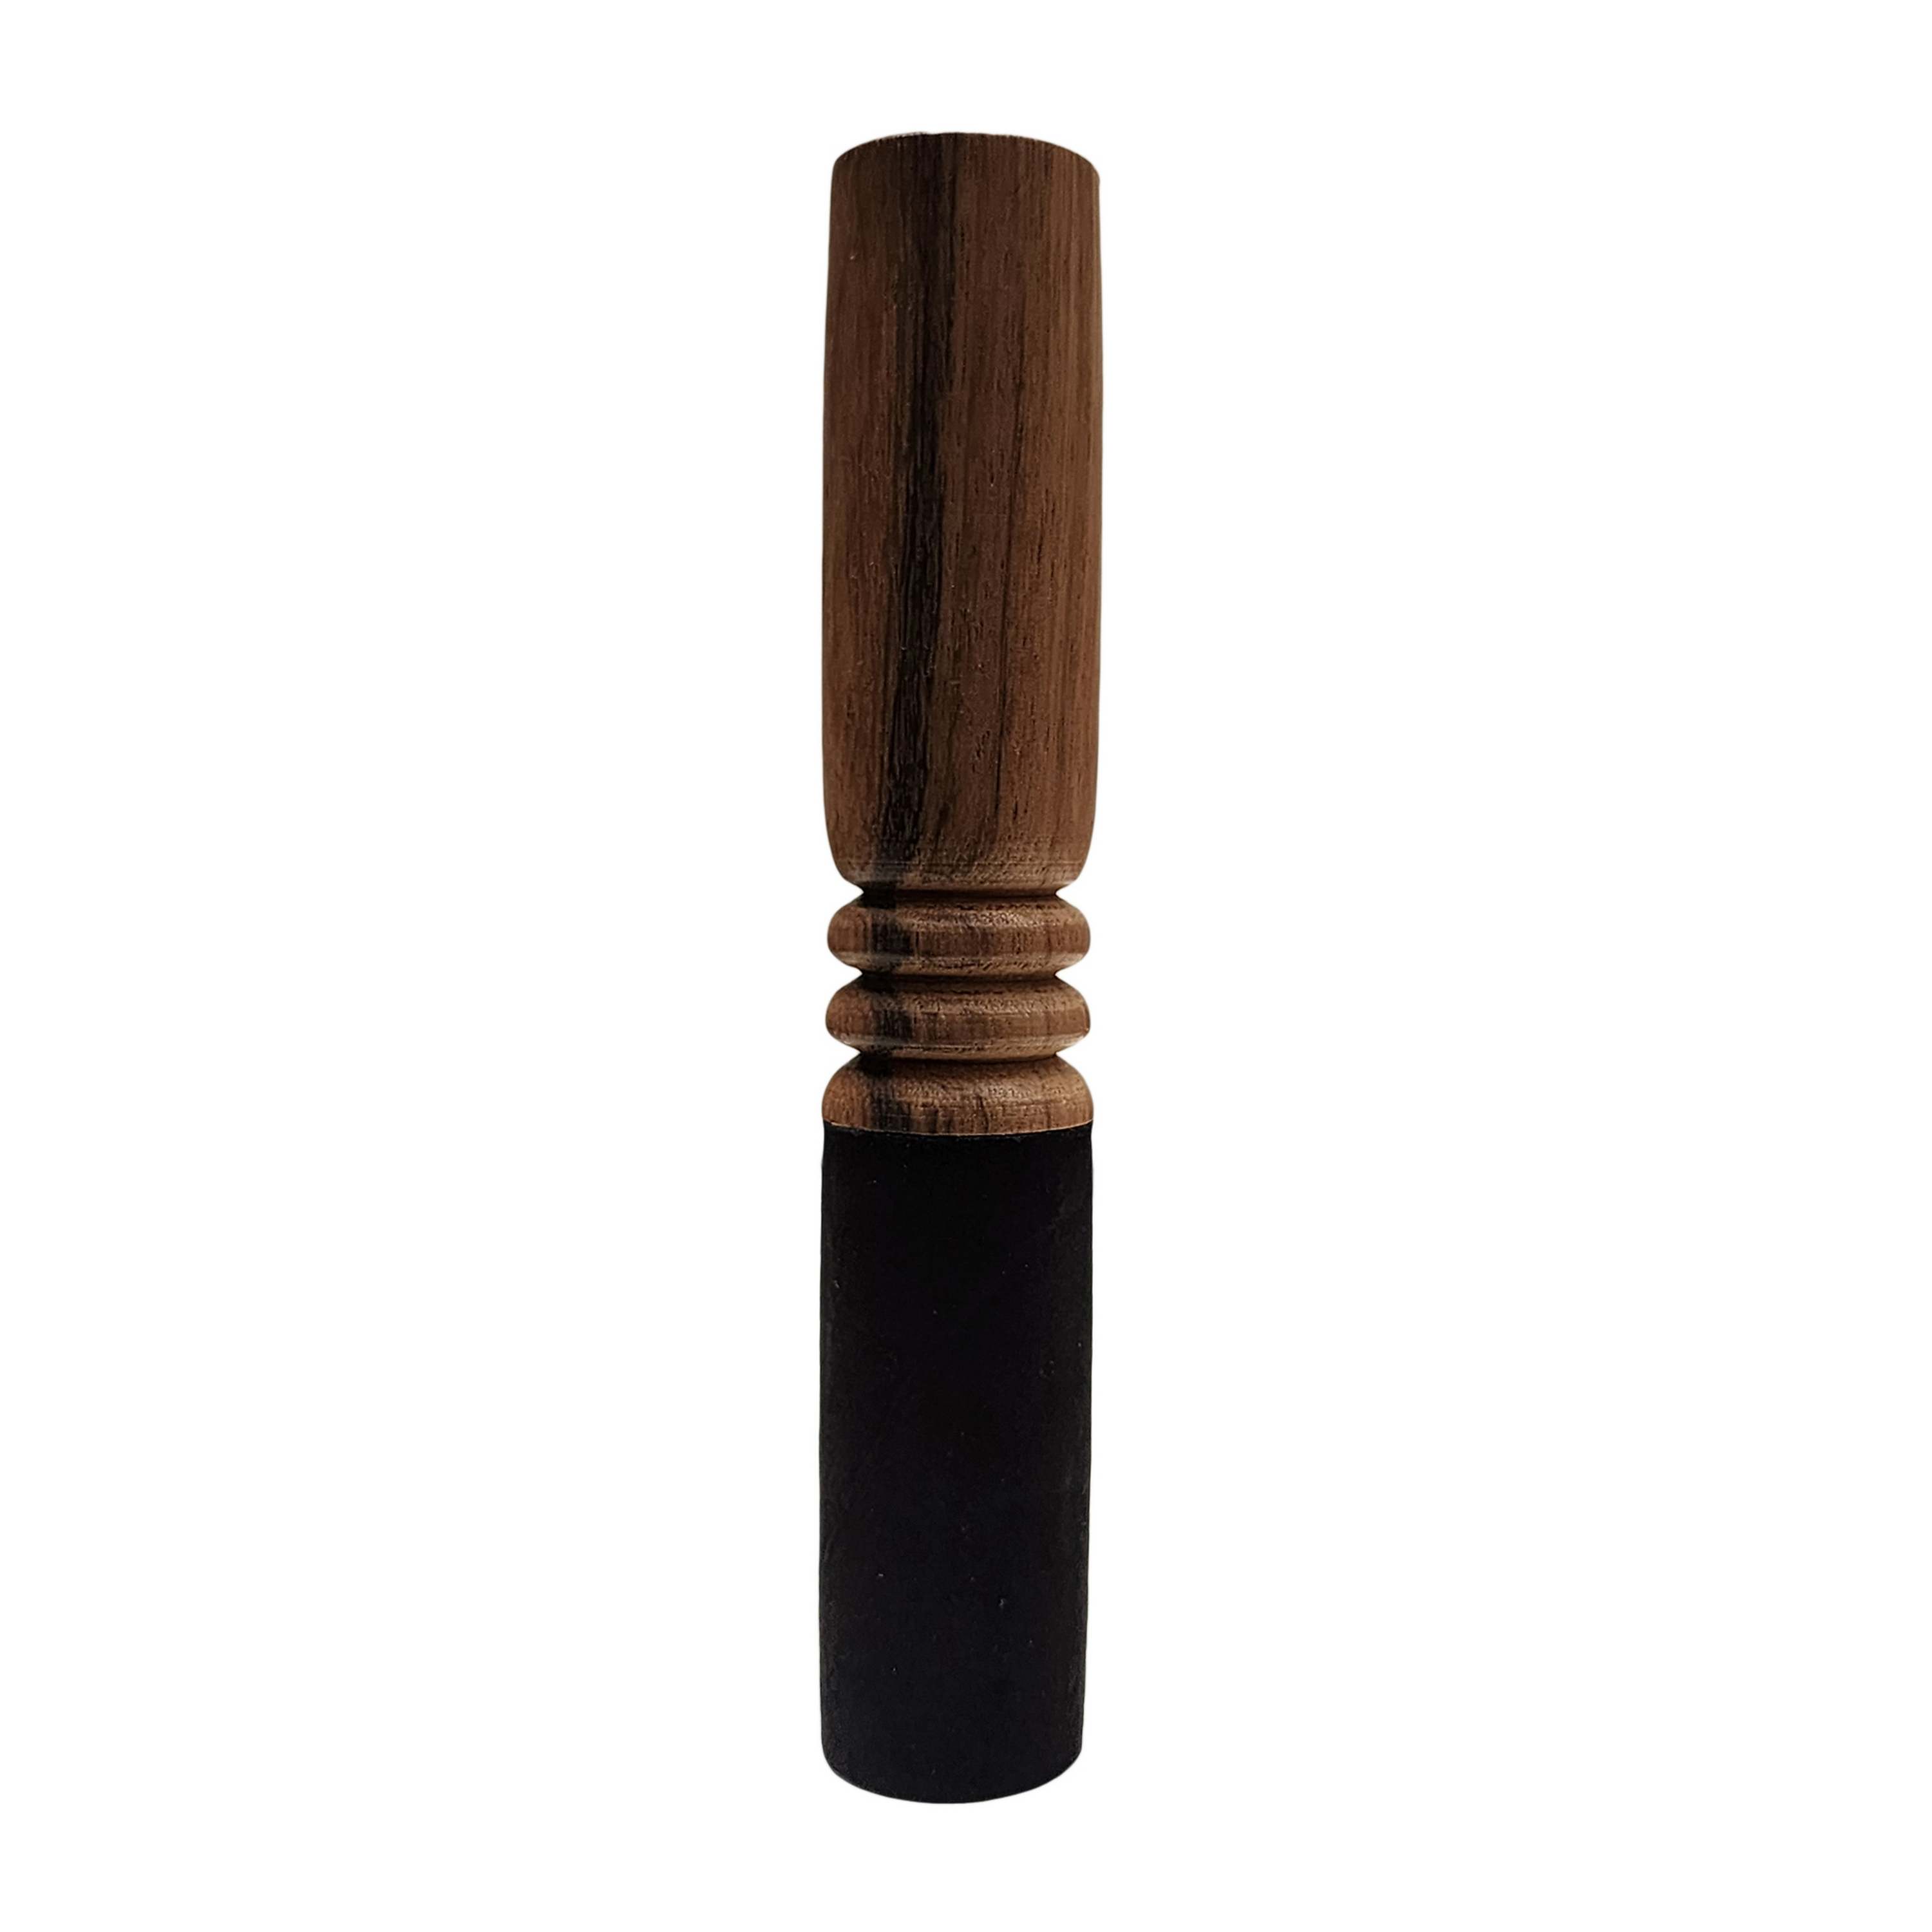 Singing Bowl Accessories, Wooden And Leather, Stroking And Playing Mallet, Medium Small